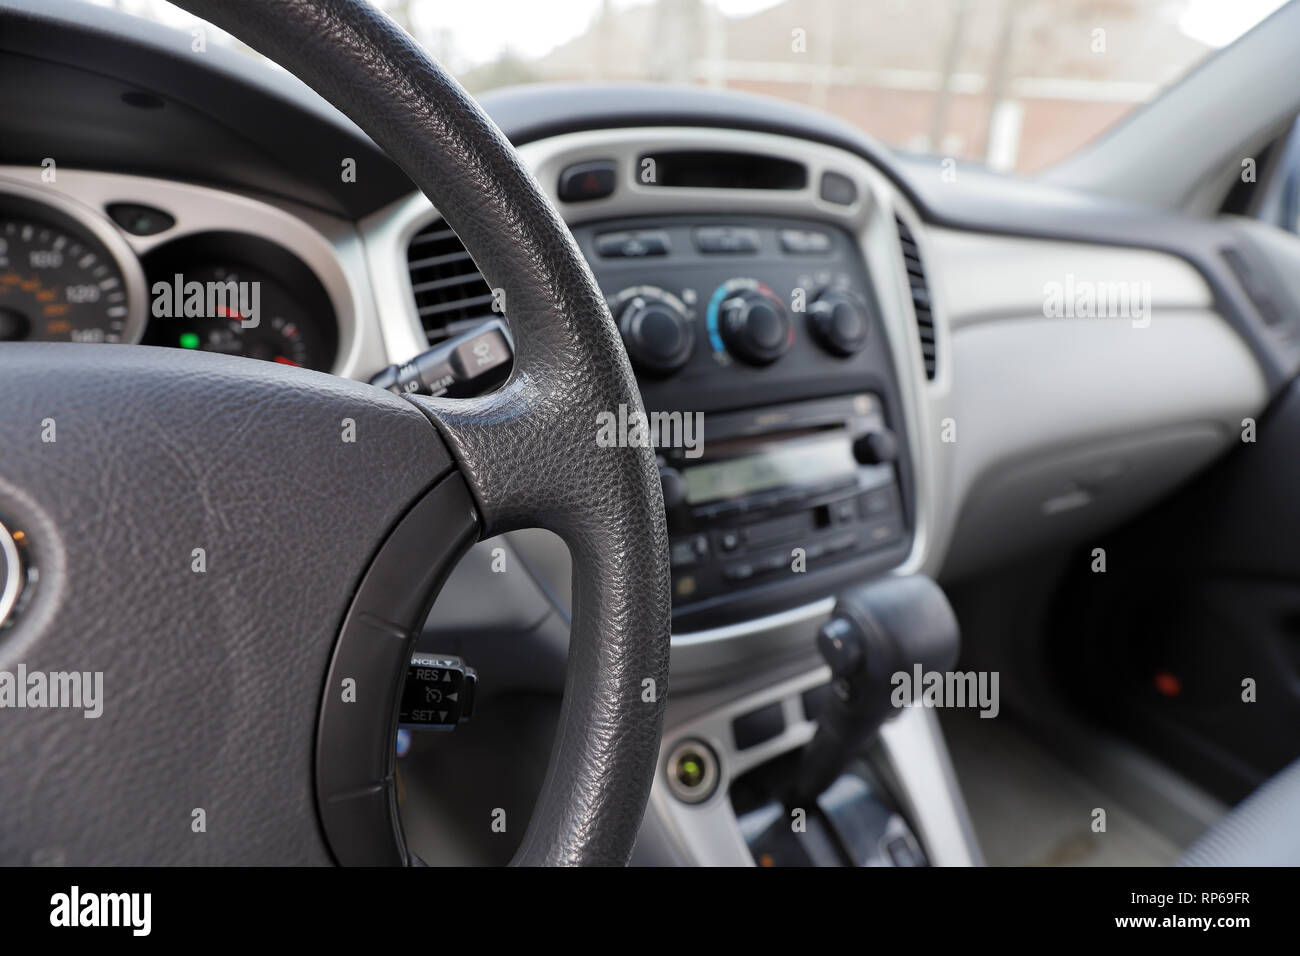 vehicle steering wheel, gear shift, radio and climate controls - interior, front, dashboard Stock Photo